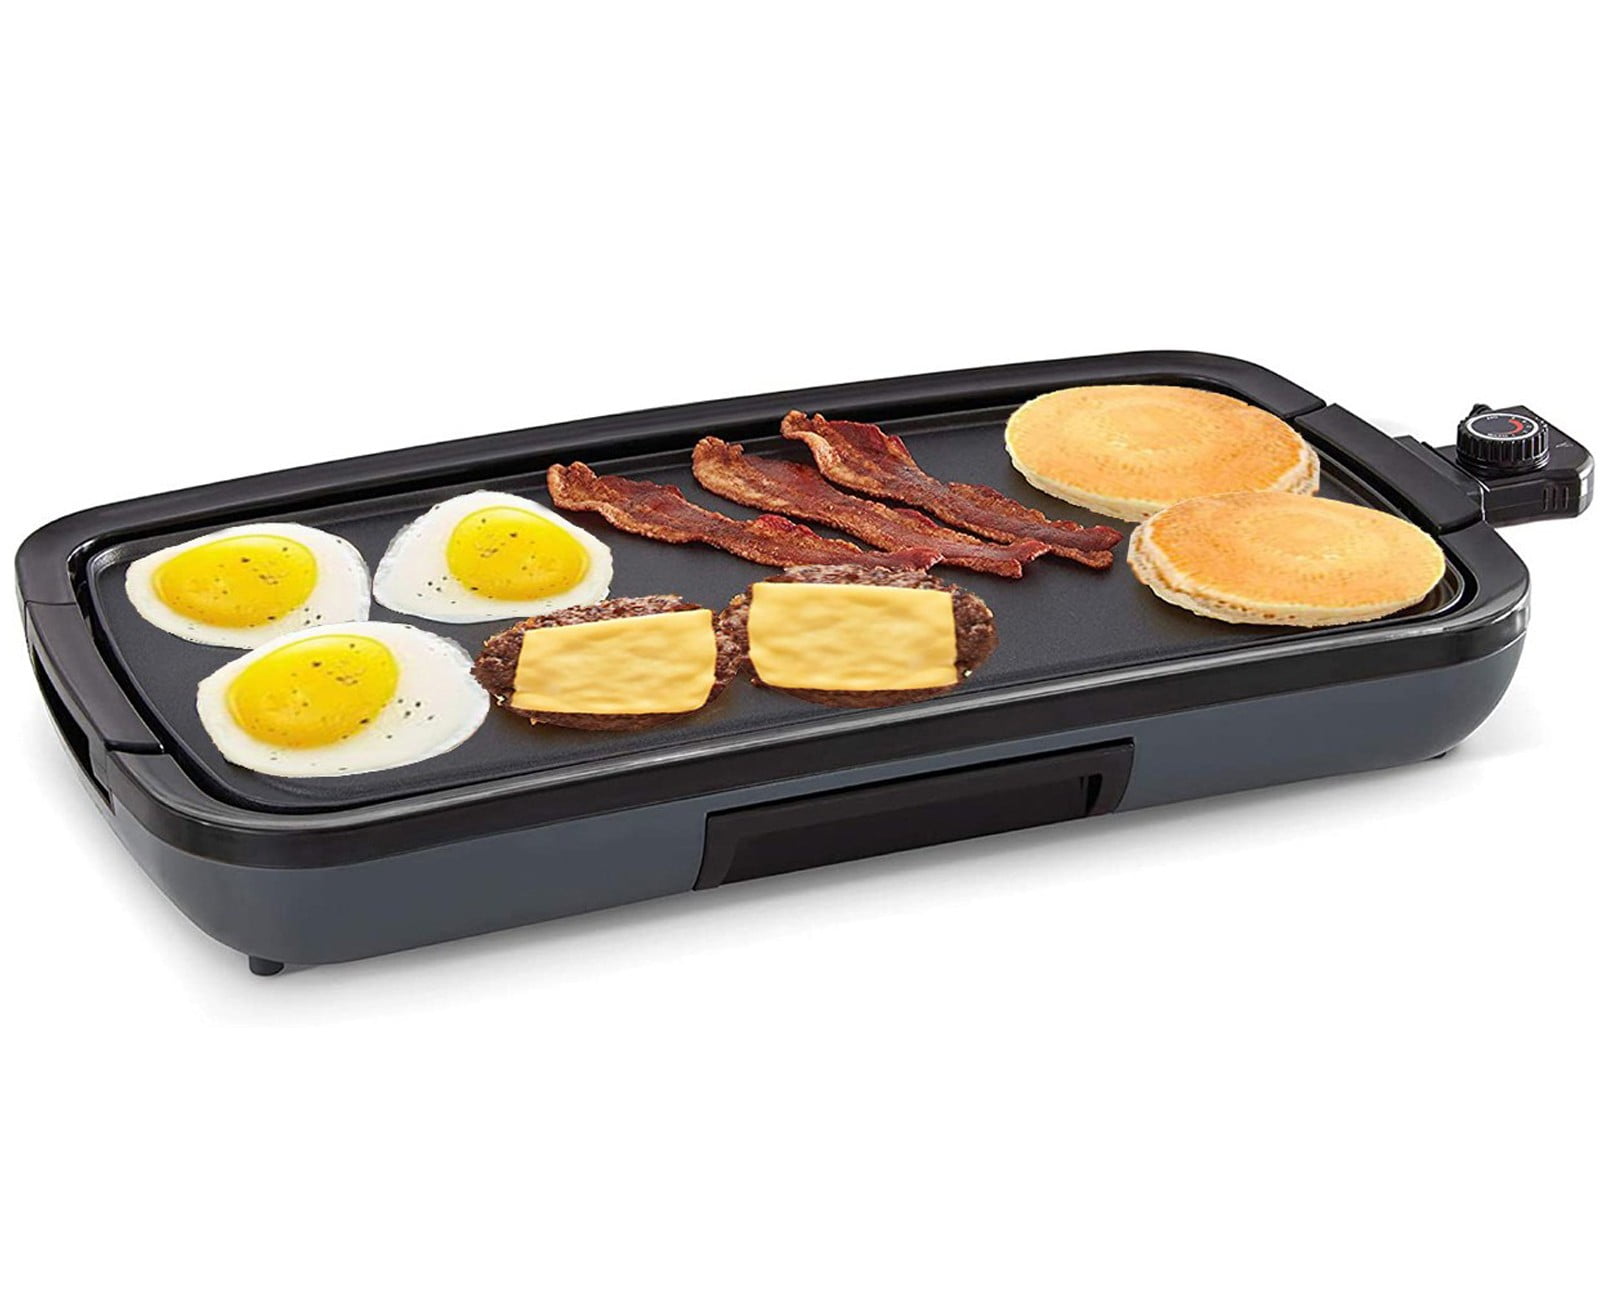 Free shipping Pancake Indoor Grill 22 inch Extra Large Griddle,Family sized  Griddle Non-stick for Pancakes,Burgers, Quesadill - AliExpress